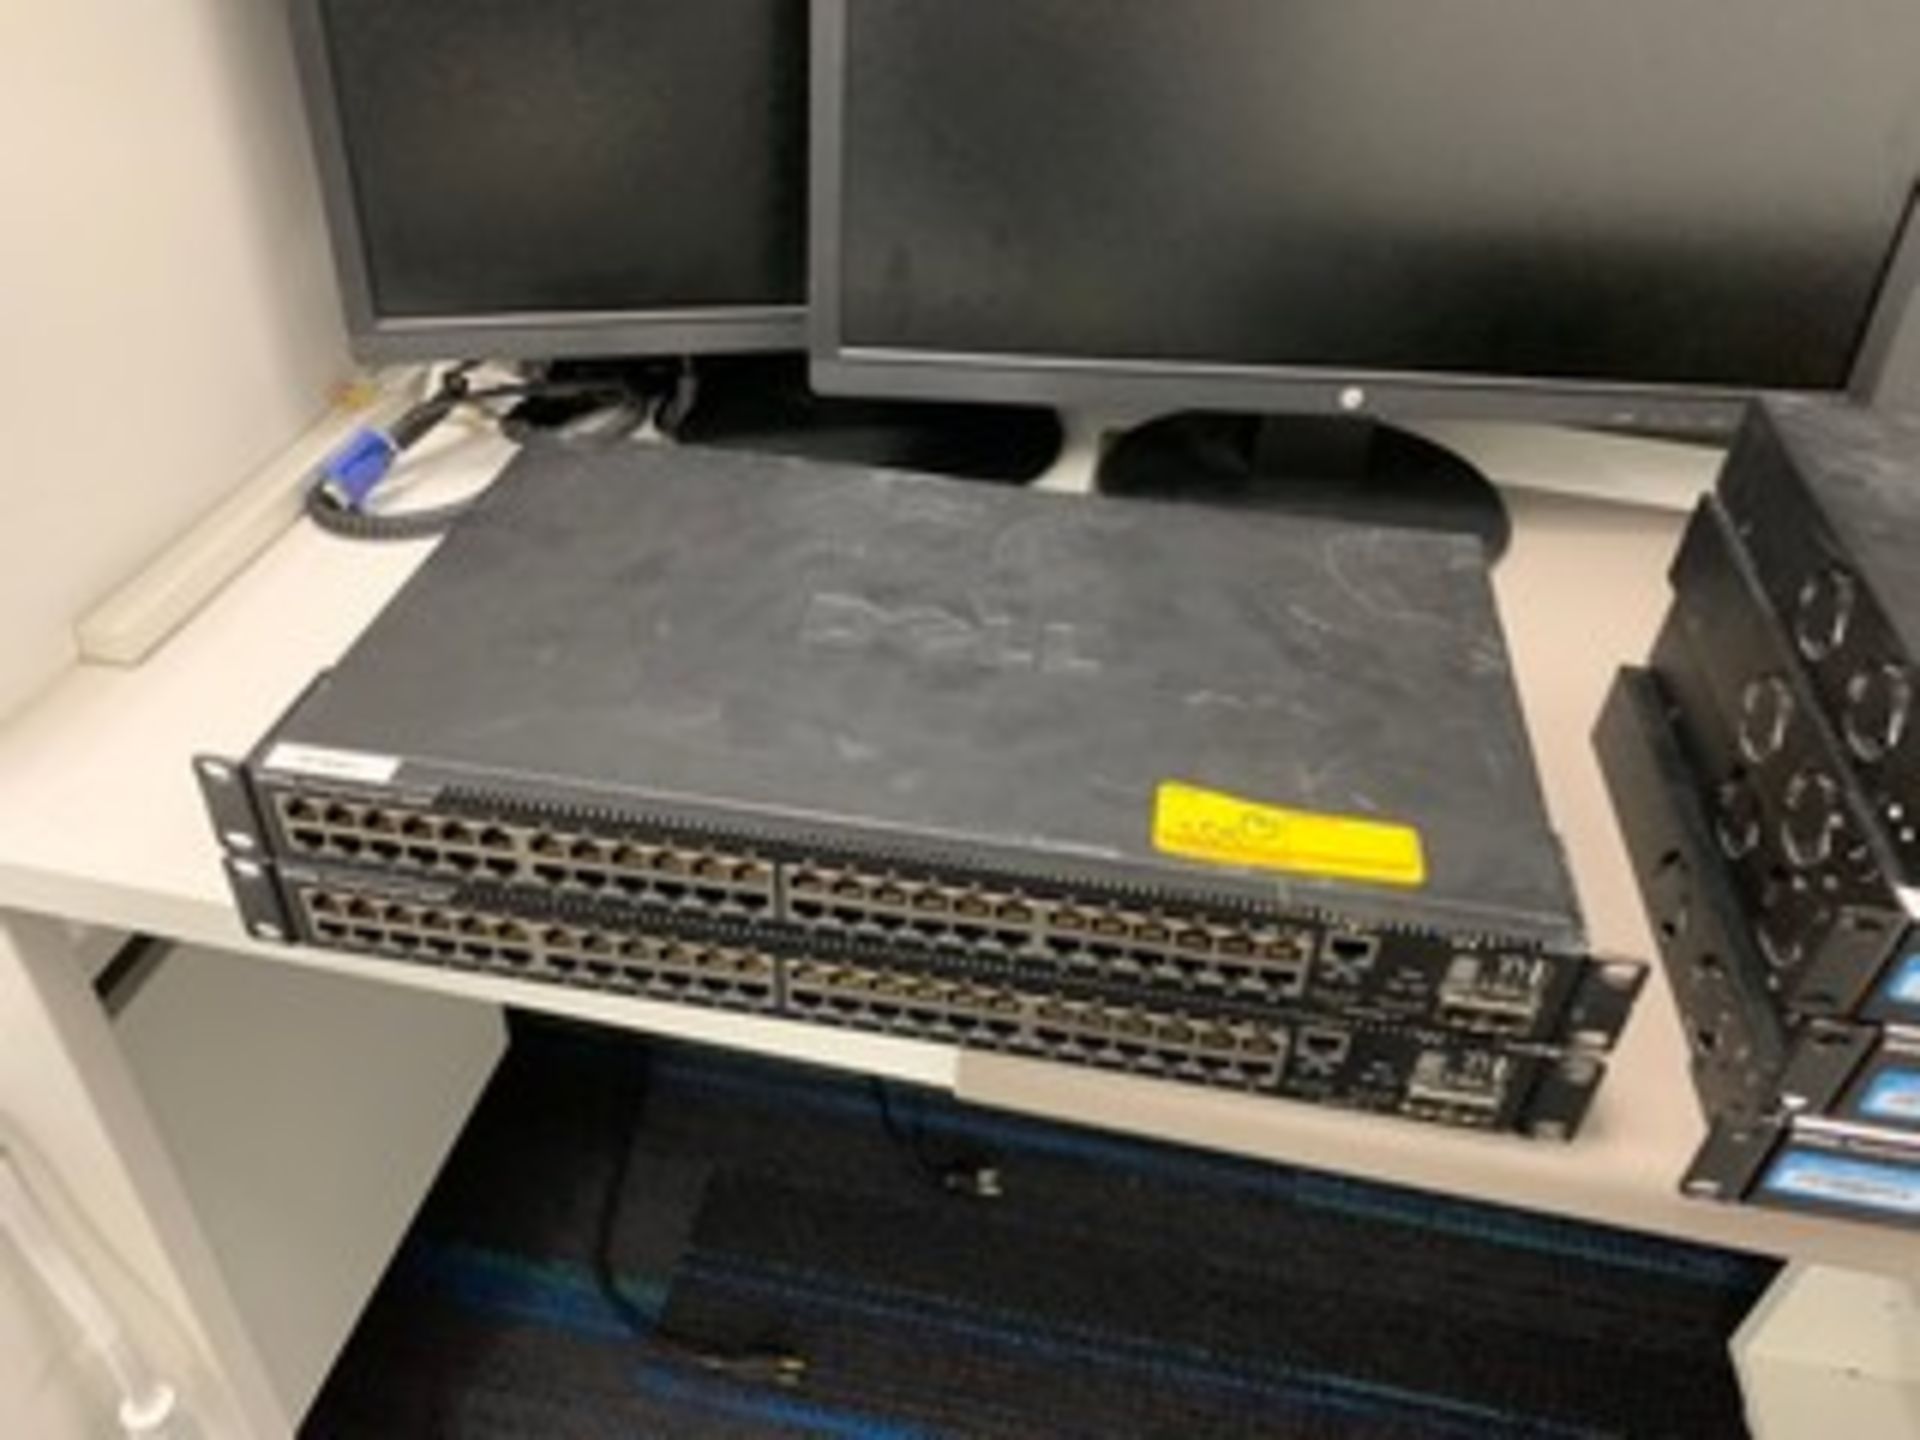 DELL POWER CONNECT 5548 SWITCHES